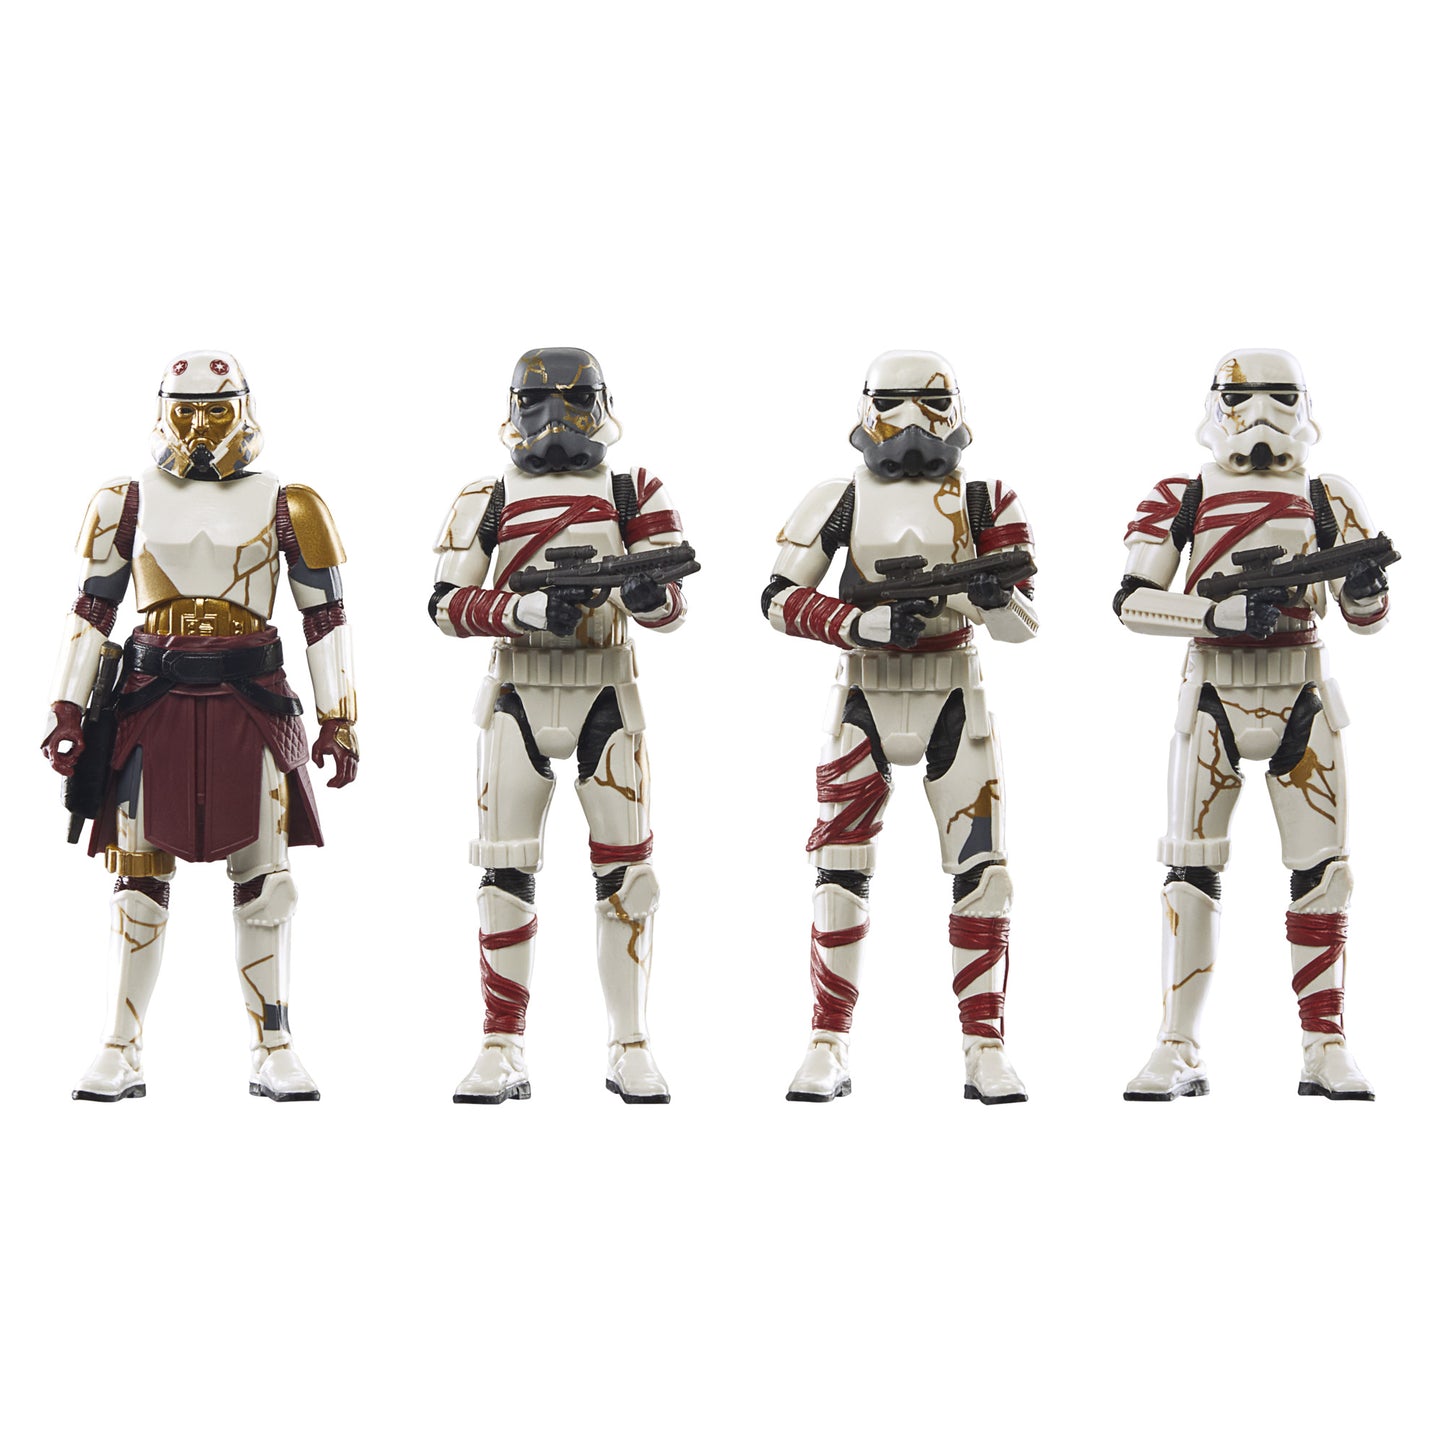 [PRE-ORDER] Star Wars The Vintage Collection Captain Enoch & Thrawn’s Night Troopers, Star Wars: Ahsoka 3.75” Action Figures